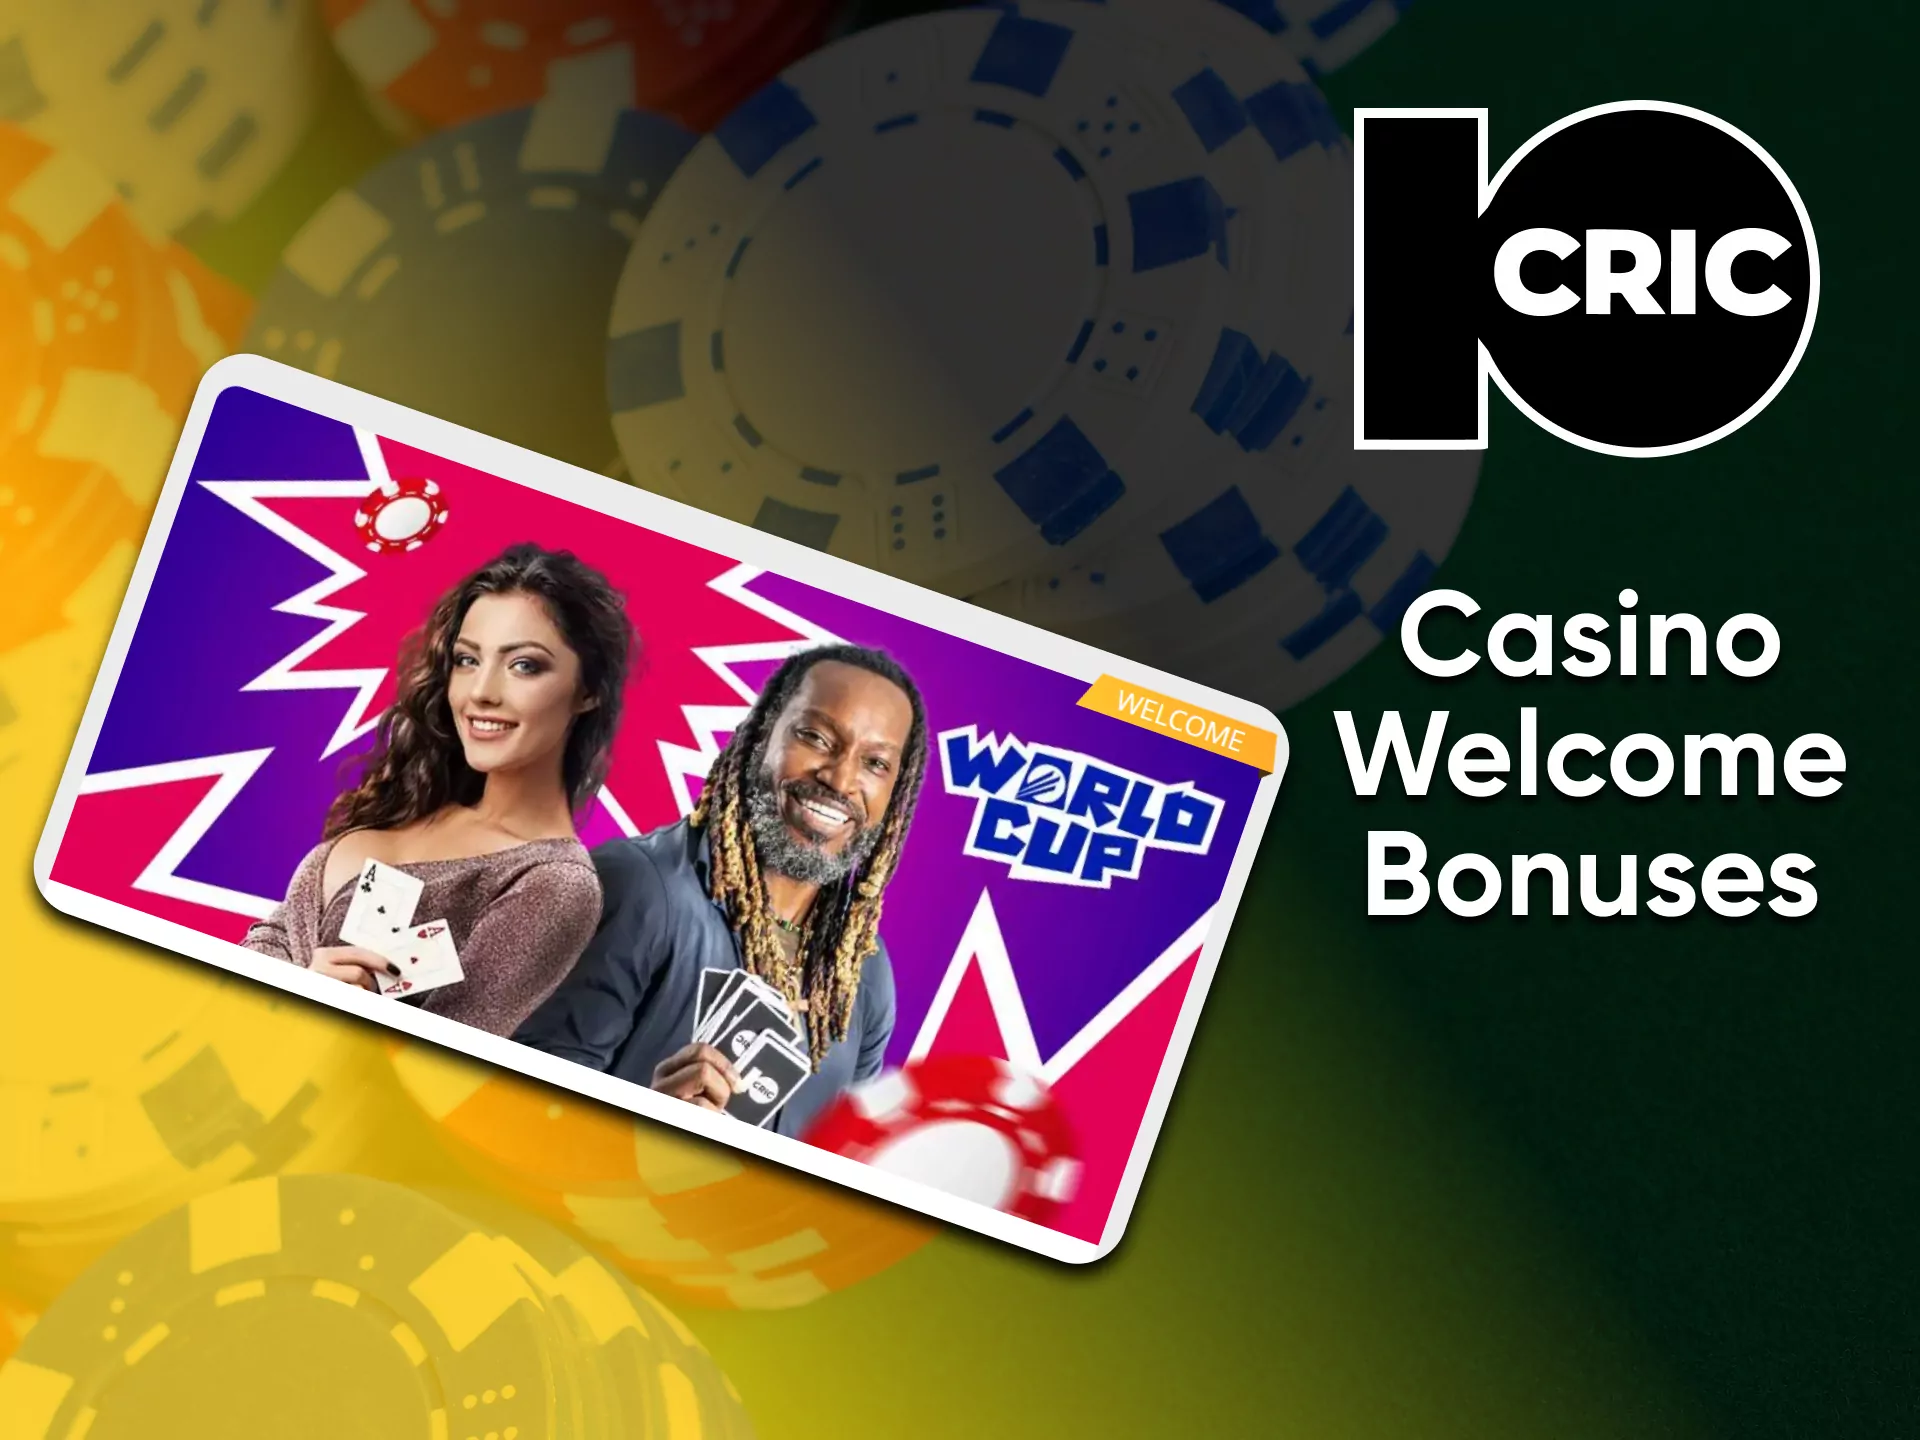 Replenish your account to receive a bonus from 10cric.